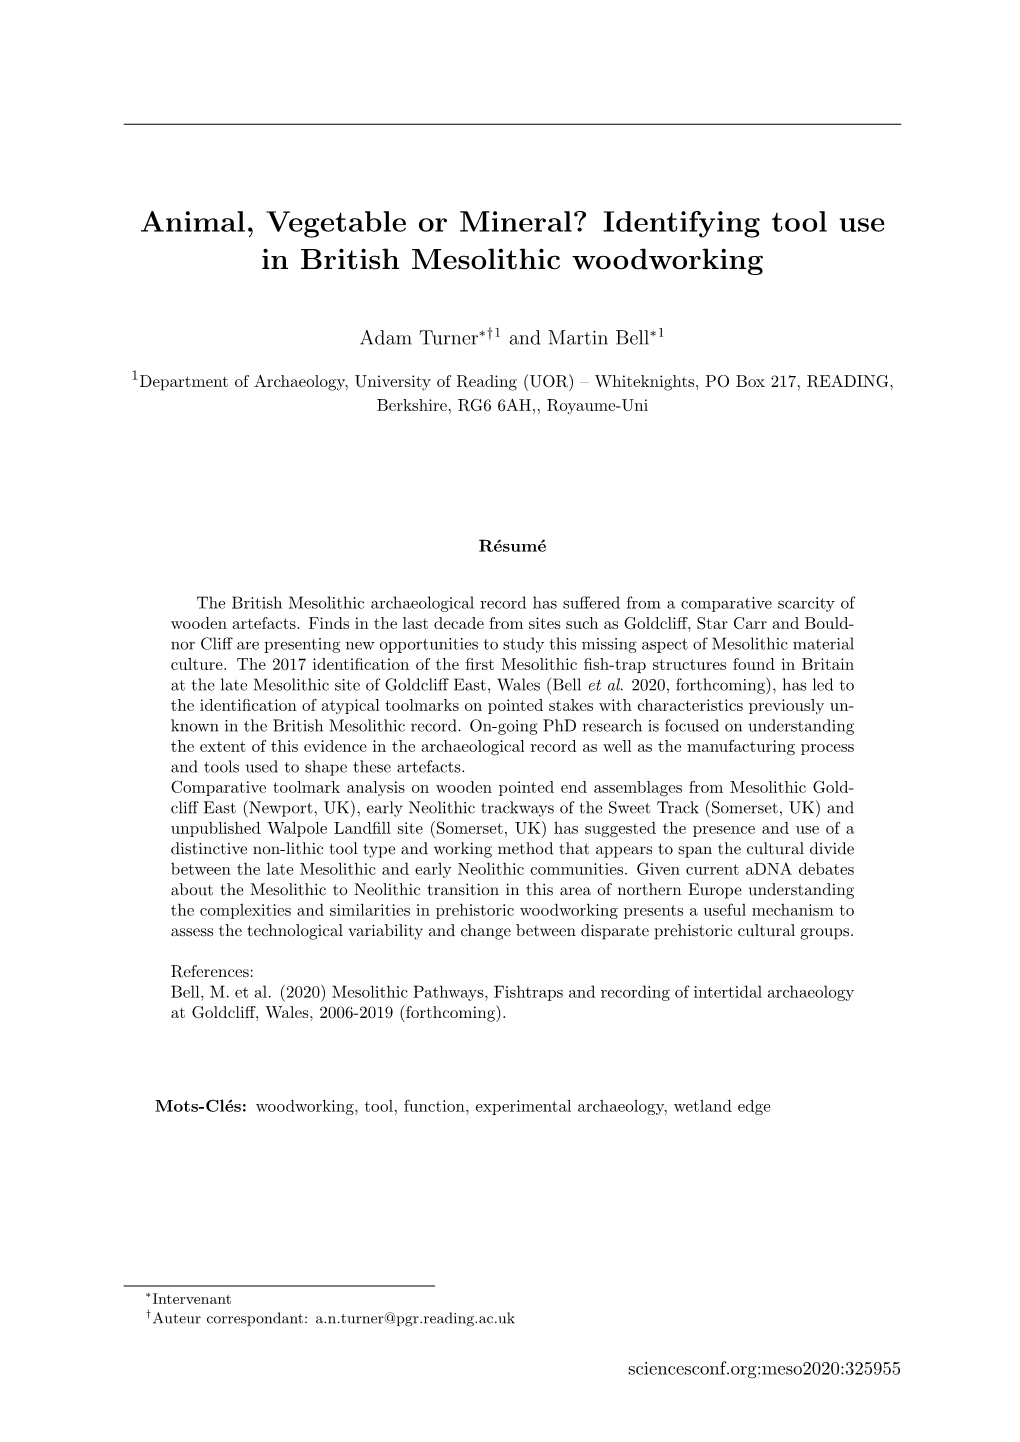 Identifying Tool Use in British Mesolithic Woodworking